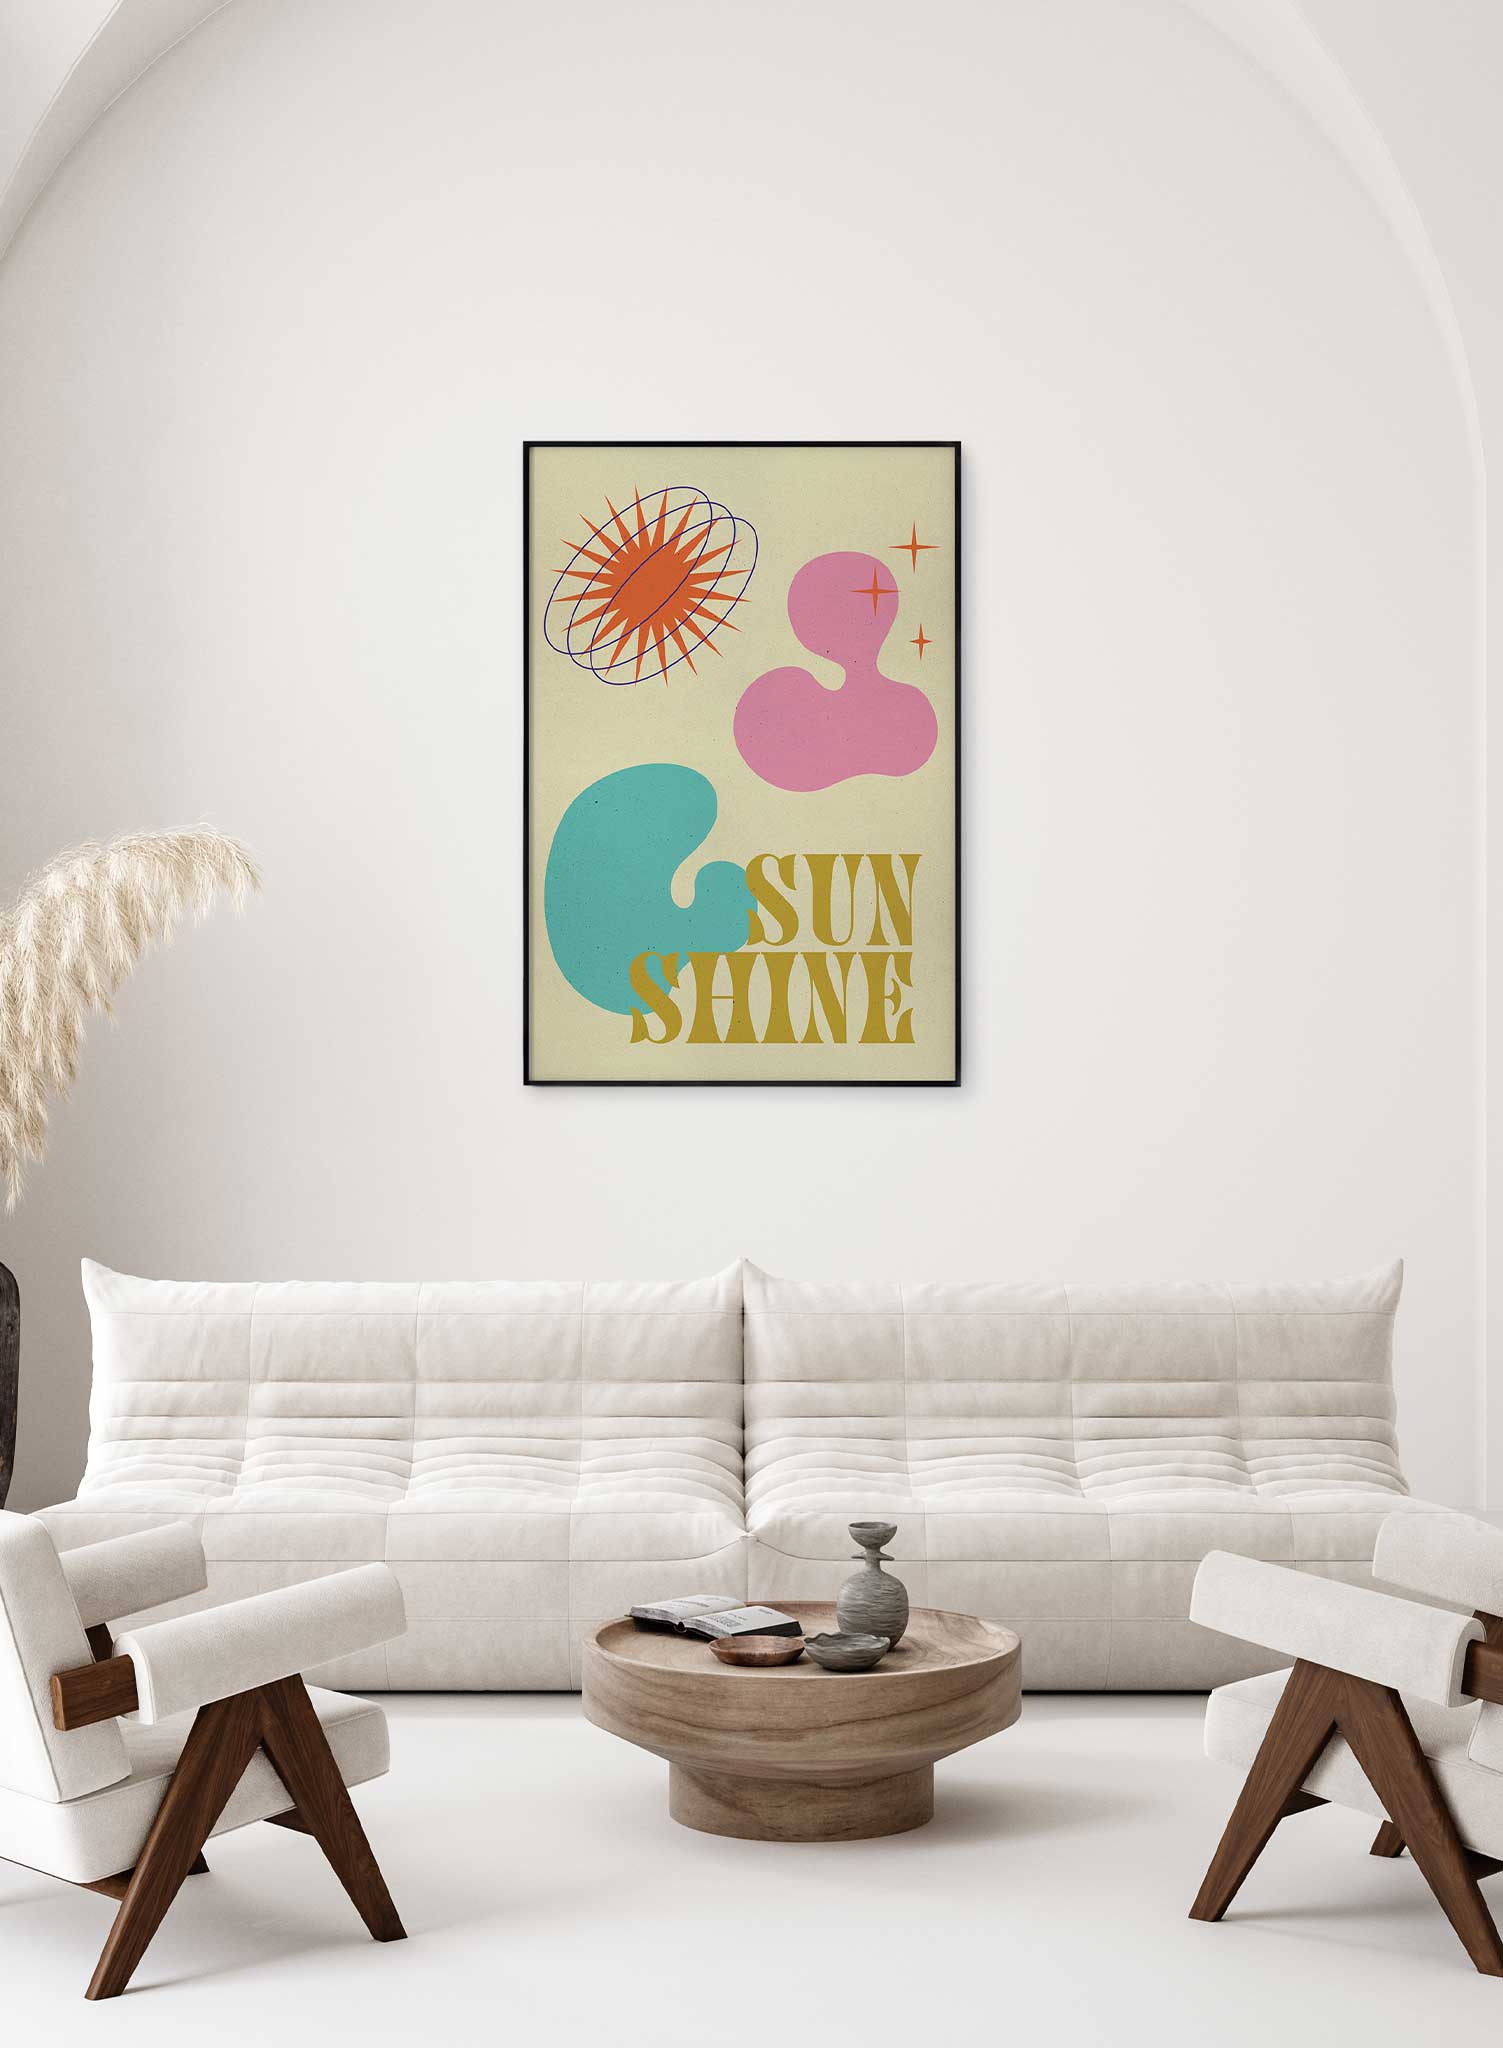 Groovy Sunshine is a colourful and vintage shapes and typography poster by Opposite Wall.